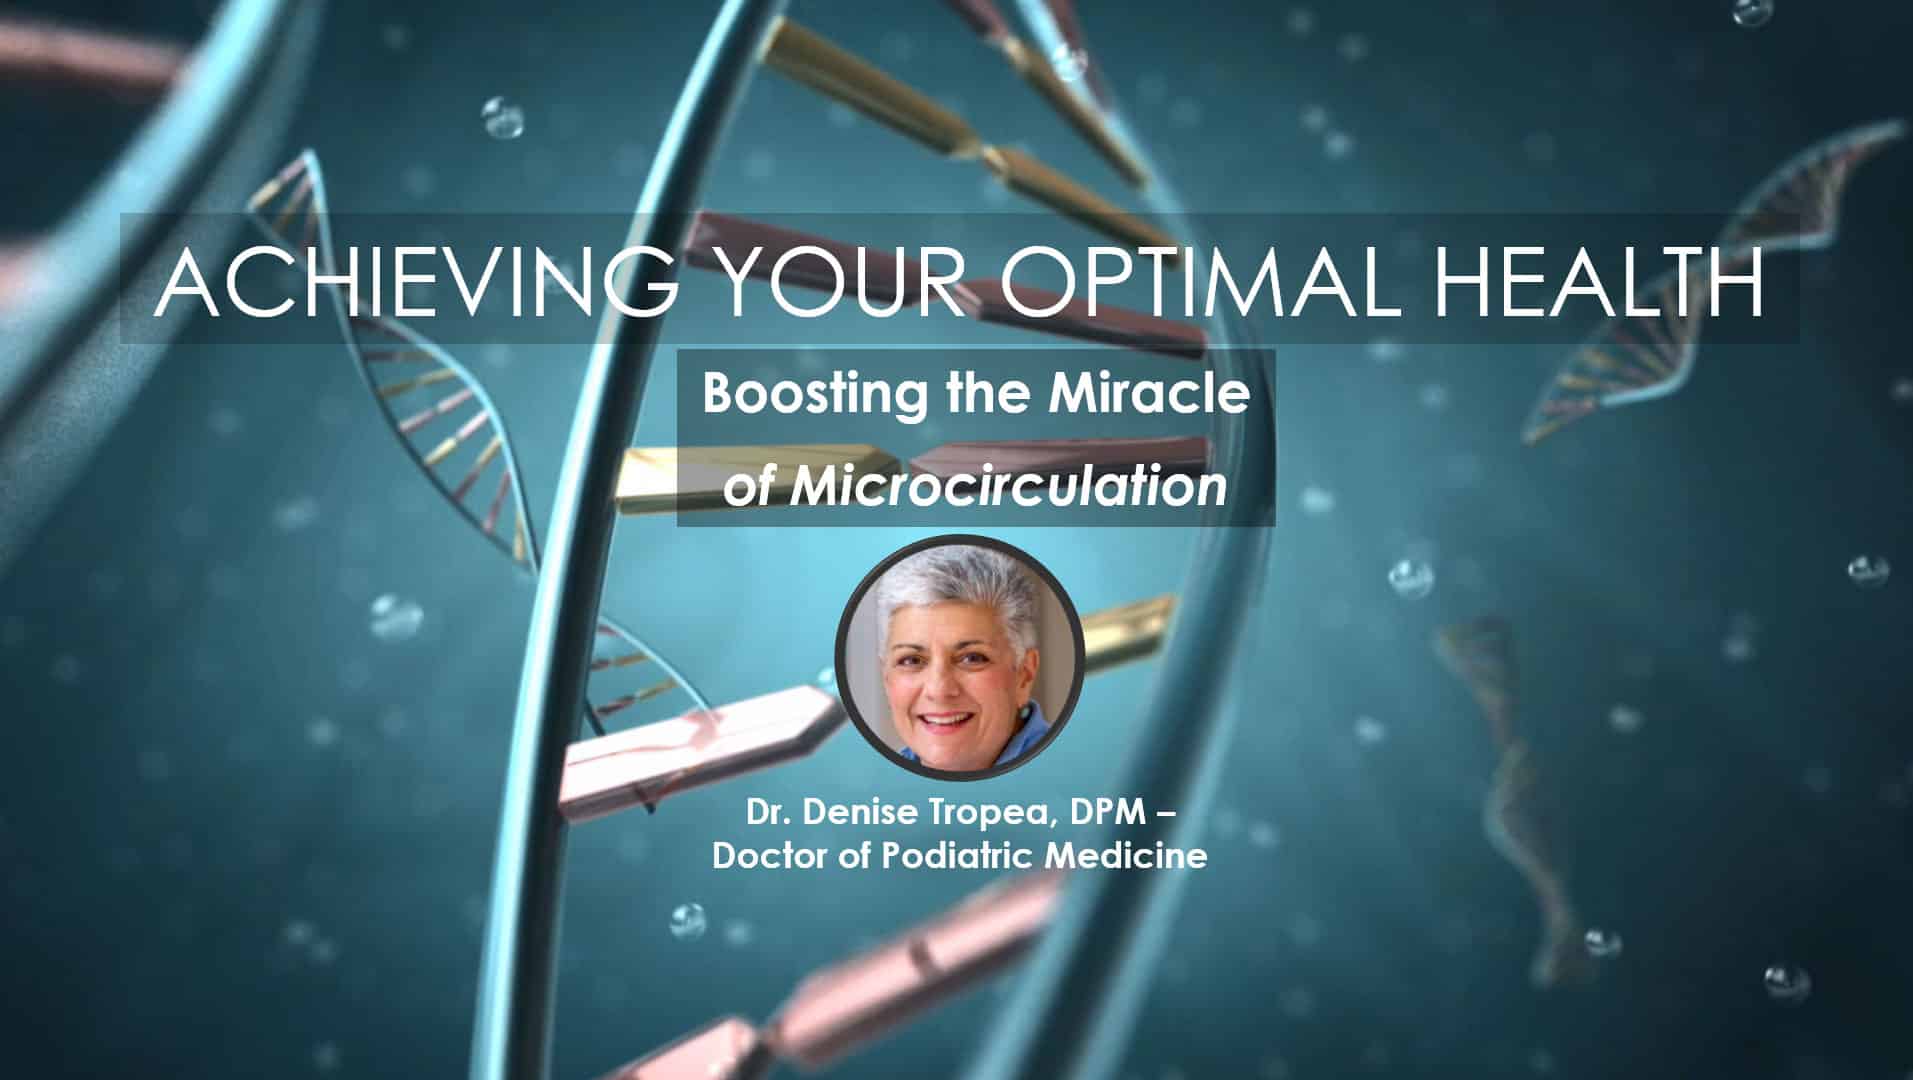 Boosting the Miracle of Microcirculation, Webinar in the Series Achieving Your Optimal Health, Presented by Dr. Denise Tropea, DPM Feature Image